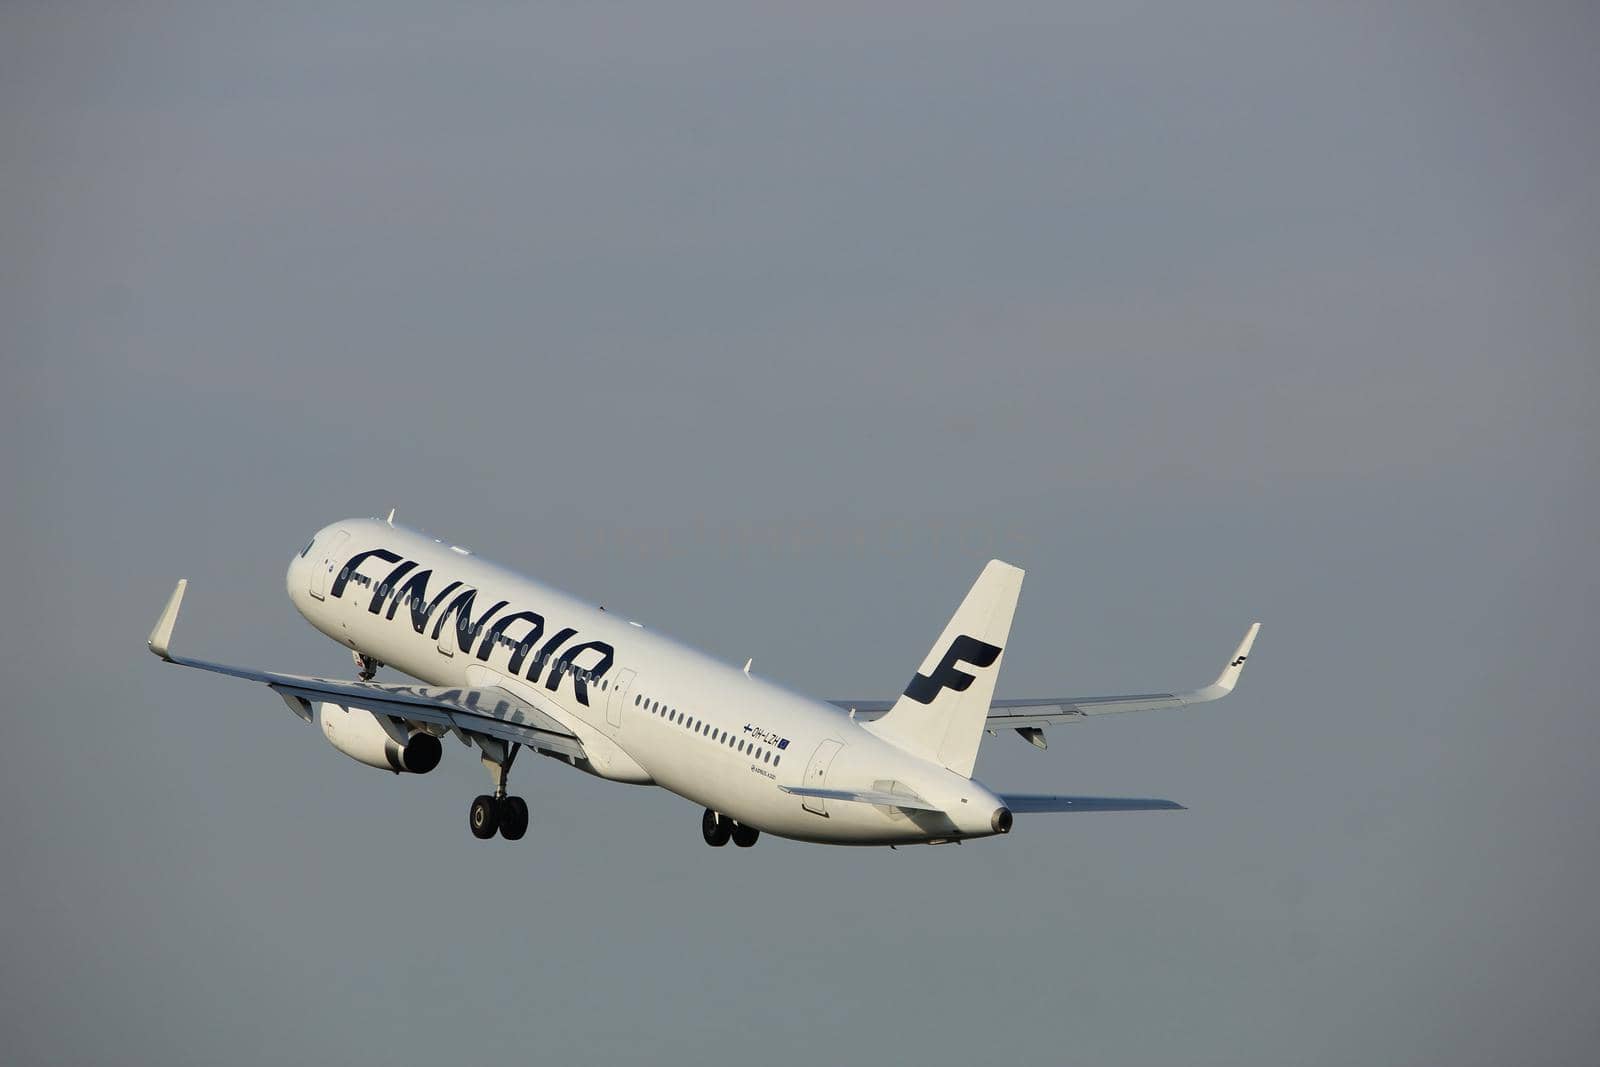 Amsterdam, the Netherlands  -  June 2nd, 2017: OH-LZH Finnair Airbus A321 taking off from Polderbaan Runway Amsterdam Airport Schiphol